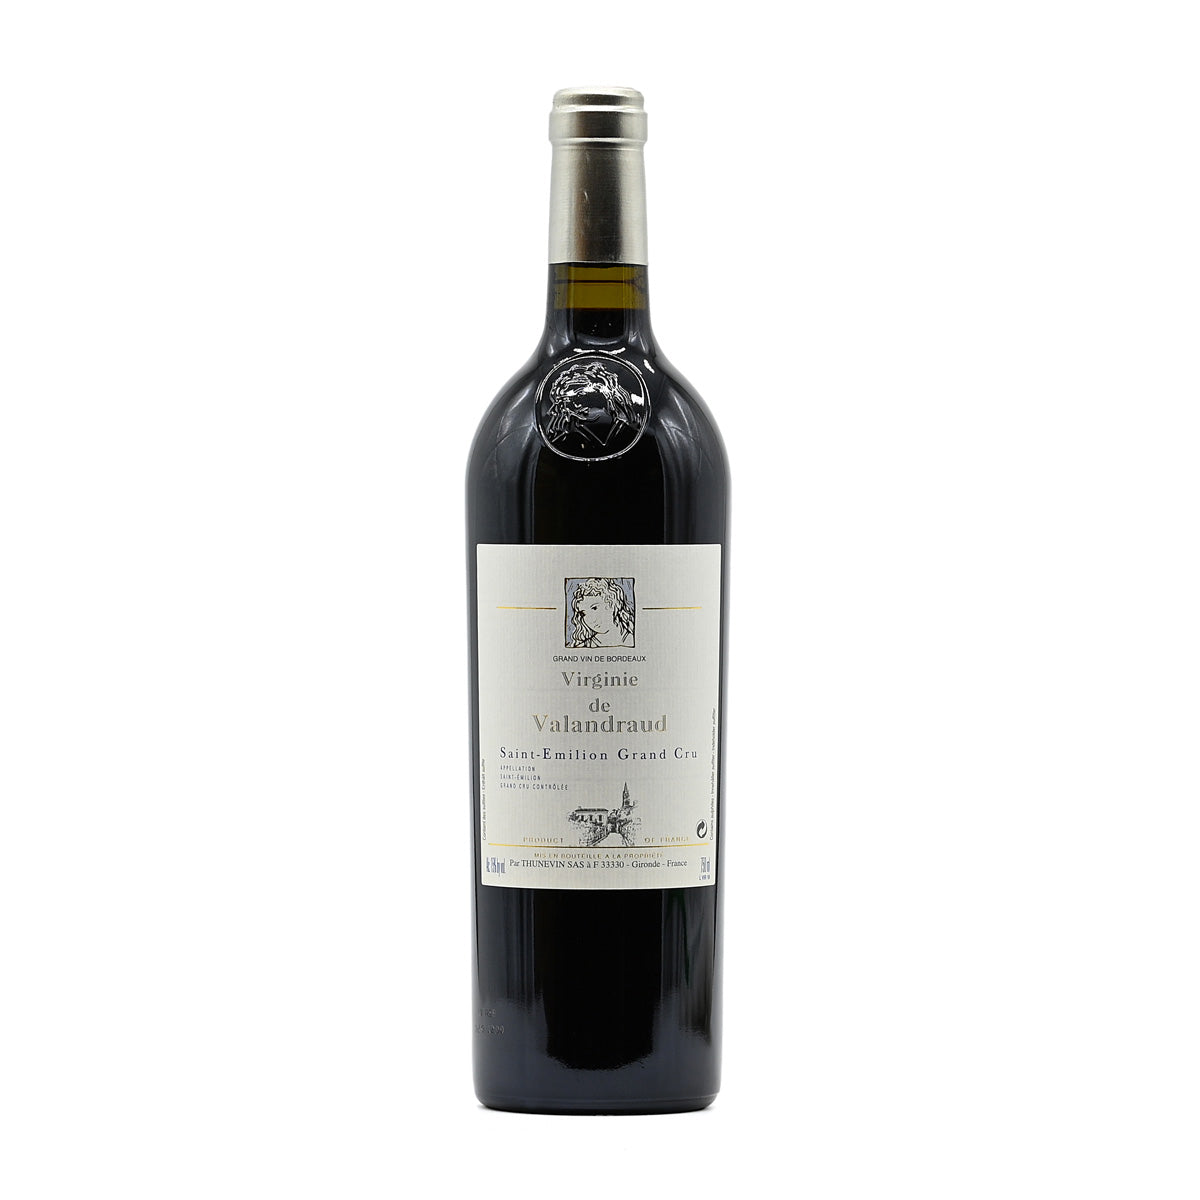 Virginie de Valandraud 2016, 750ml French red wine; made of a blend of Merlot, Cabernet Sauvignon, and Cabernet Franc; from Saint-Emilion Grand Cru, Bordeaux, France – GDV Fine Wines, Hong Kong